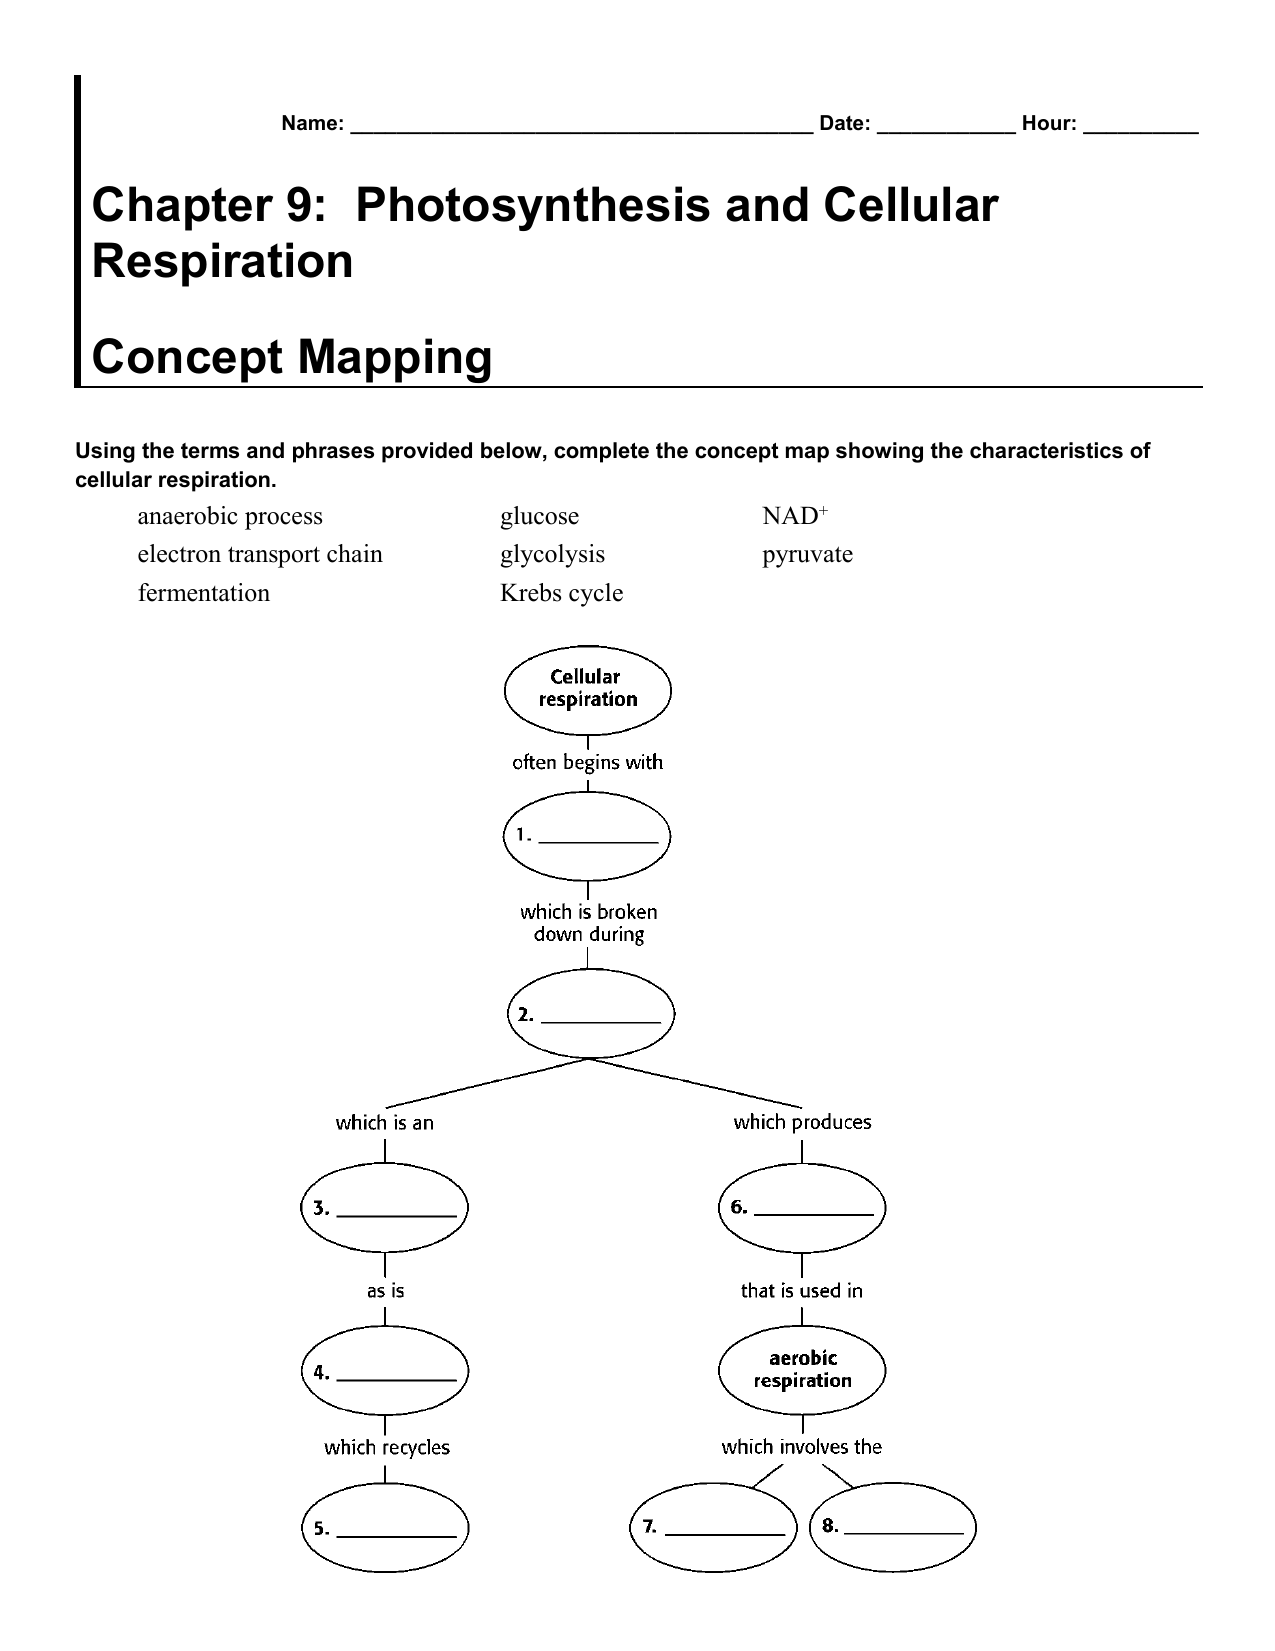 Chapter 9 Photosynthesis And Cellular Respiration Concept Mapping